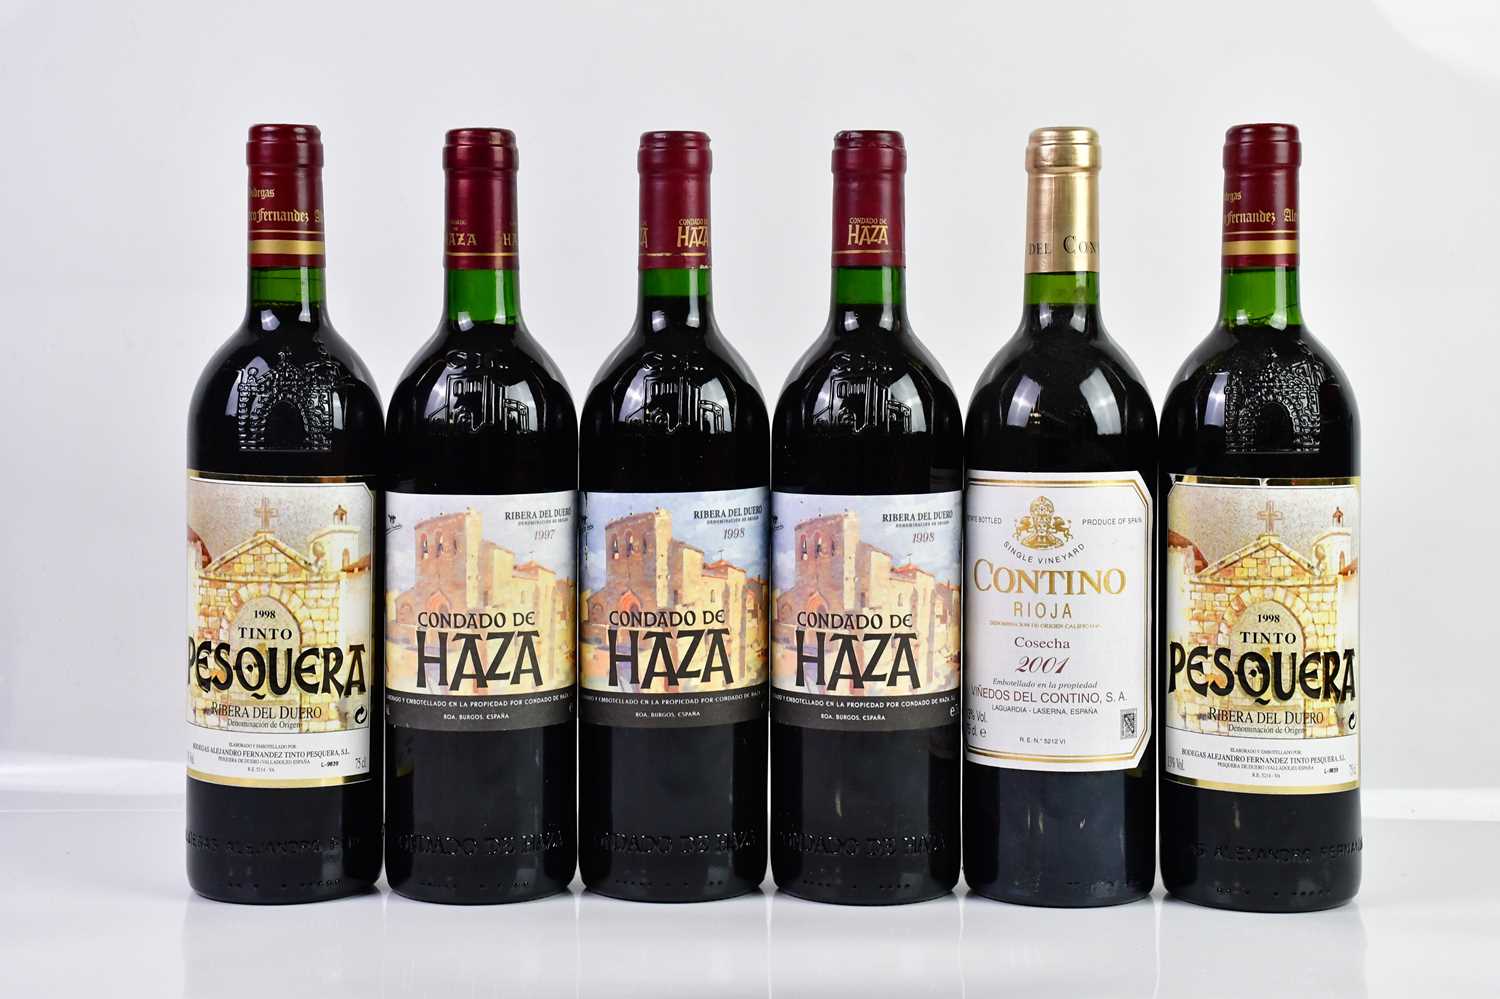 RED WINE; six bottles of mixed red white including two bottles of Condado de Haza Ribera del Duero